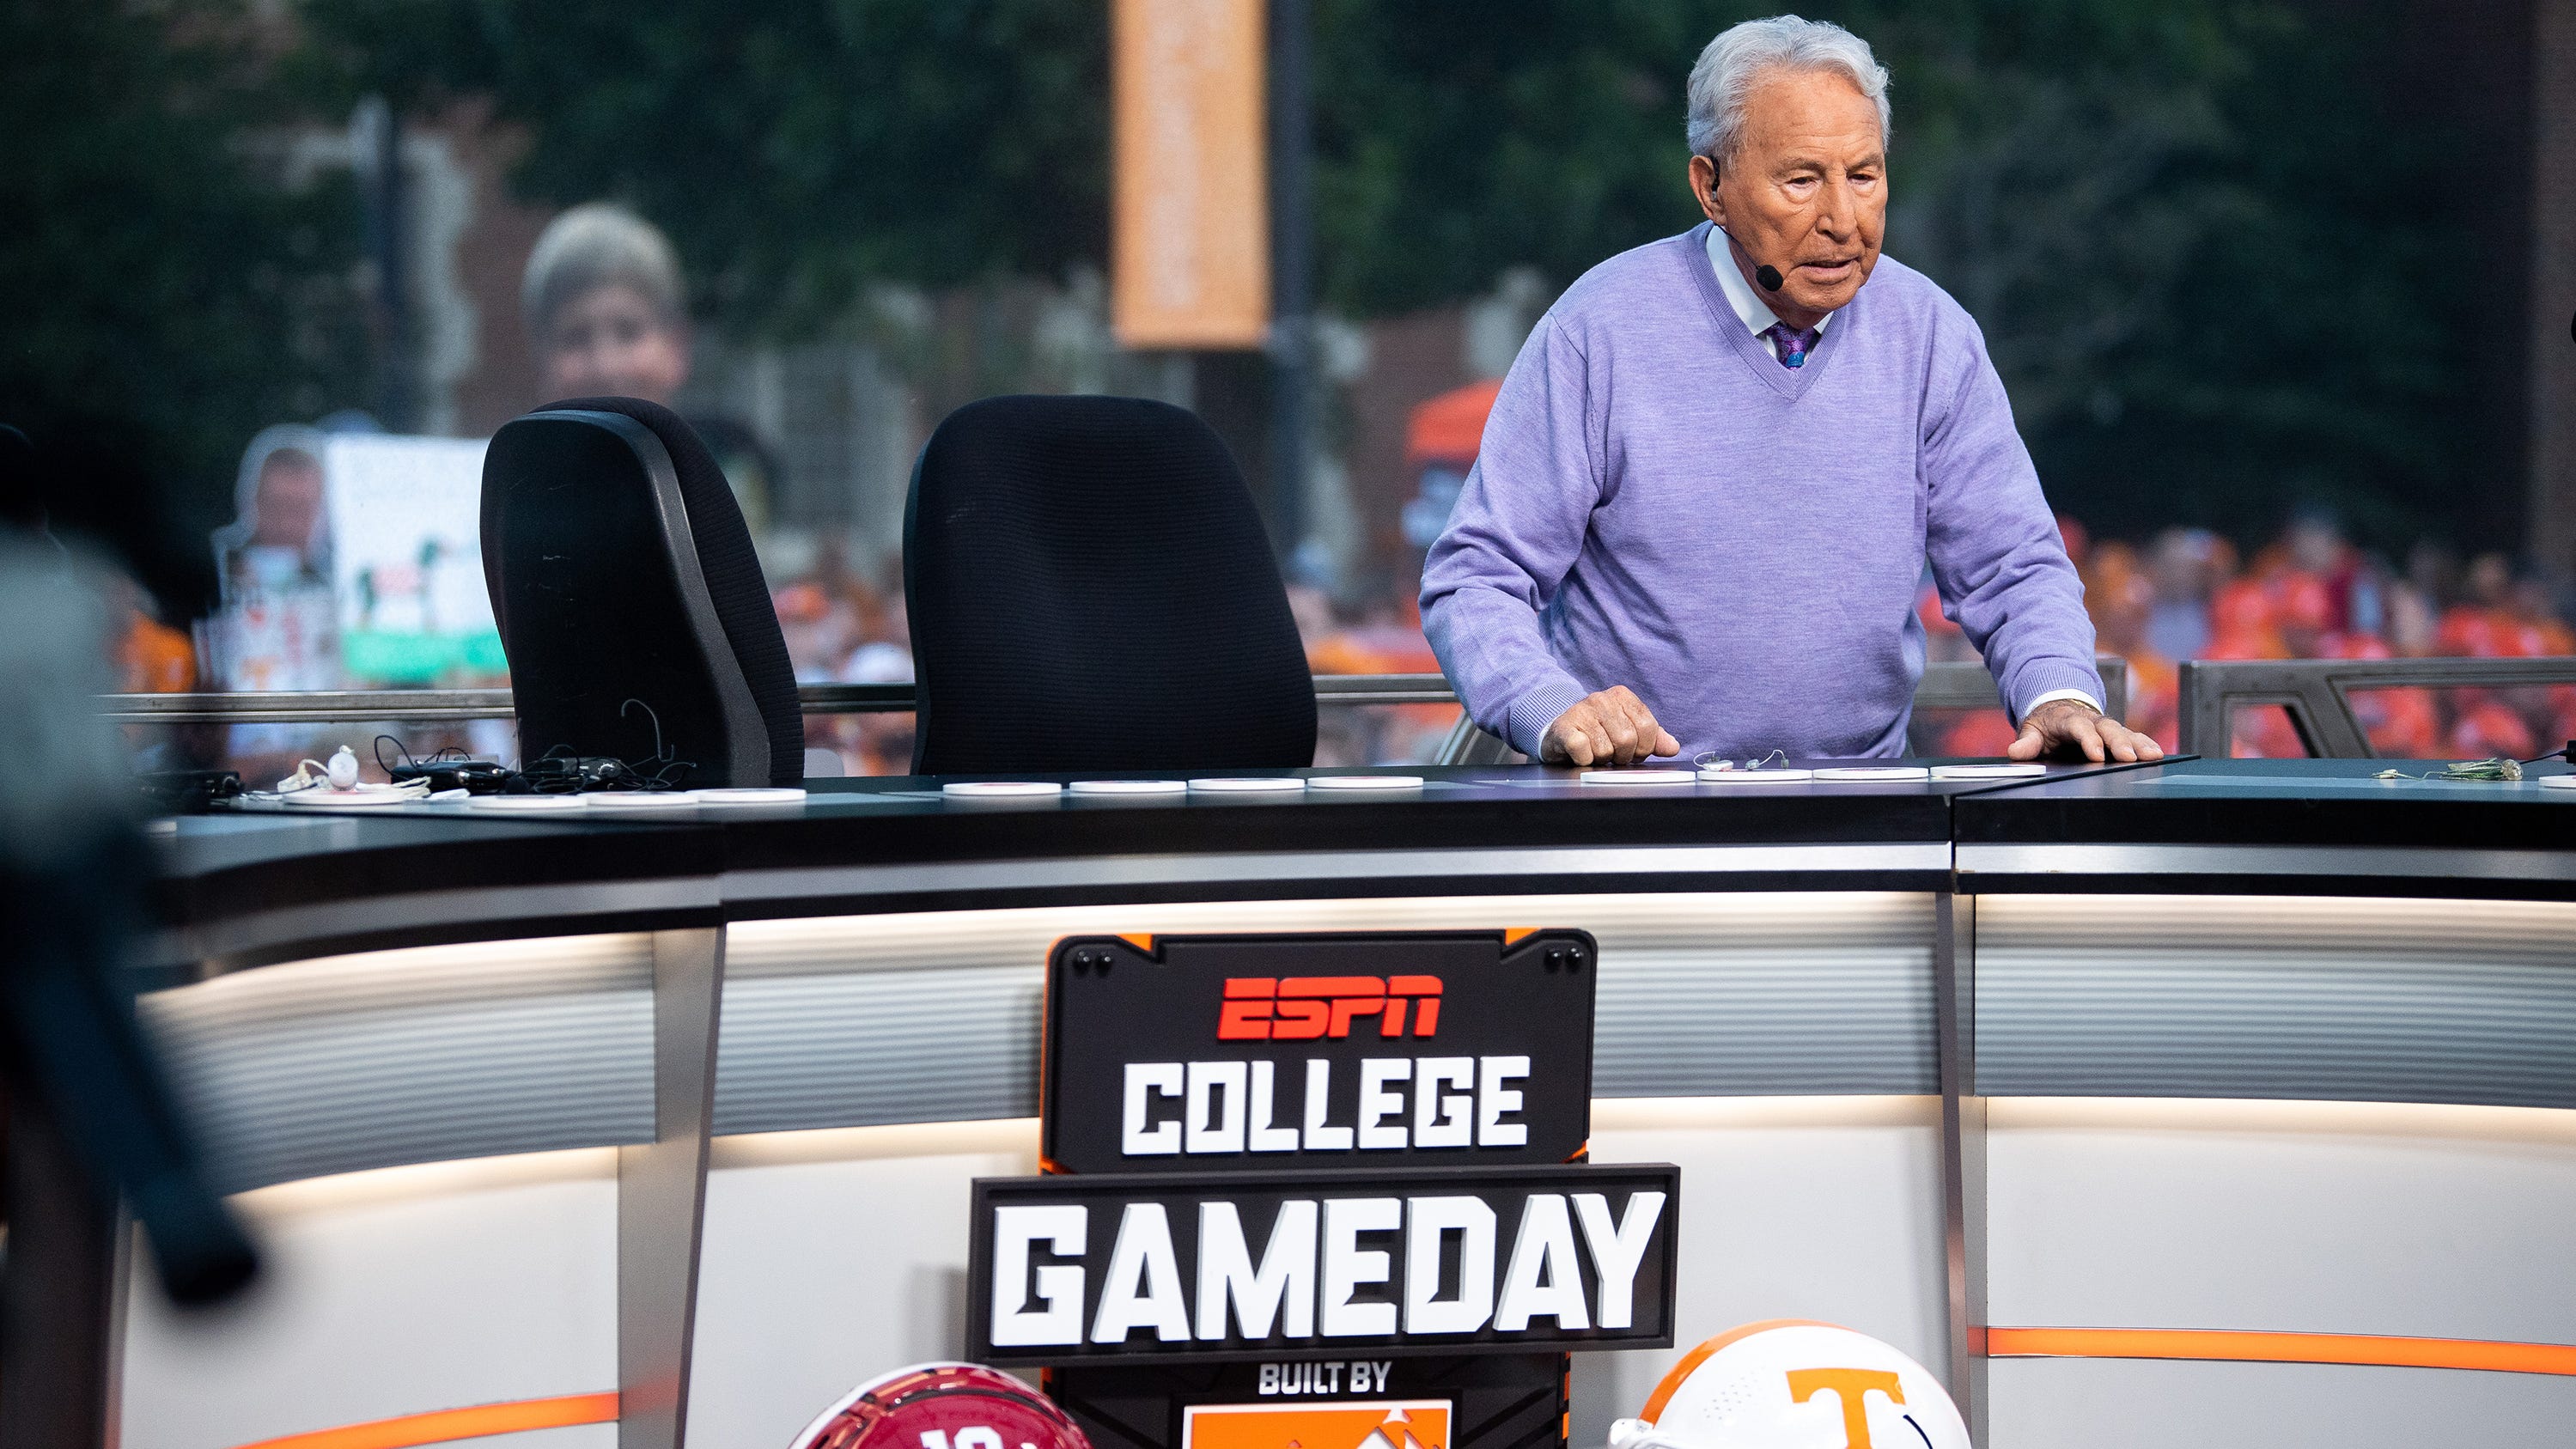 Lee Corso attends ESPN's 'College GameDay' for Tennessee vs. Alabama